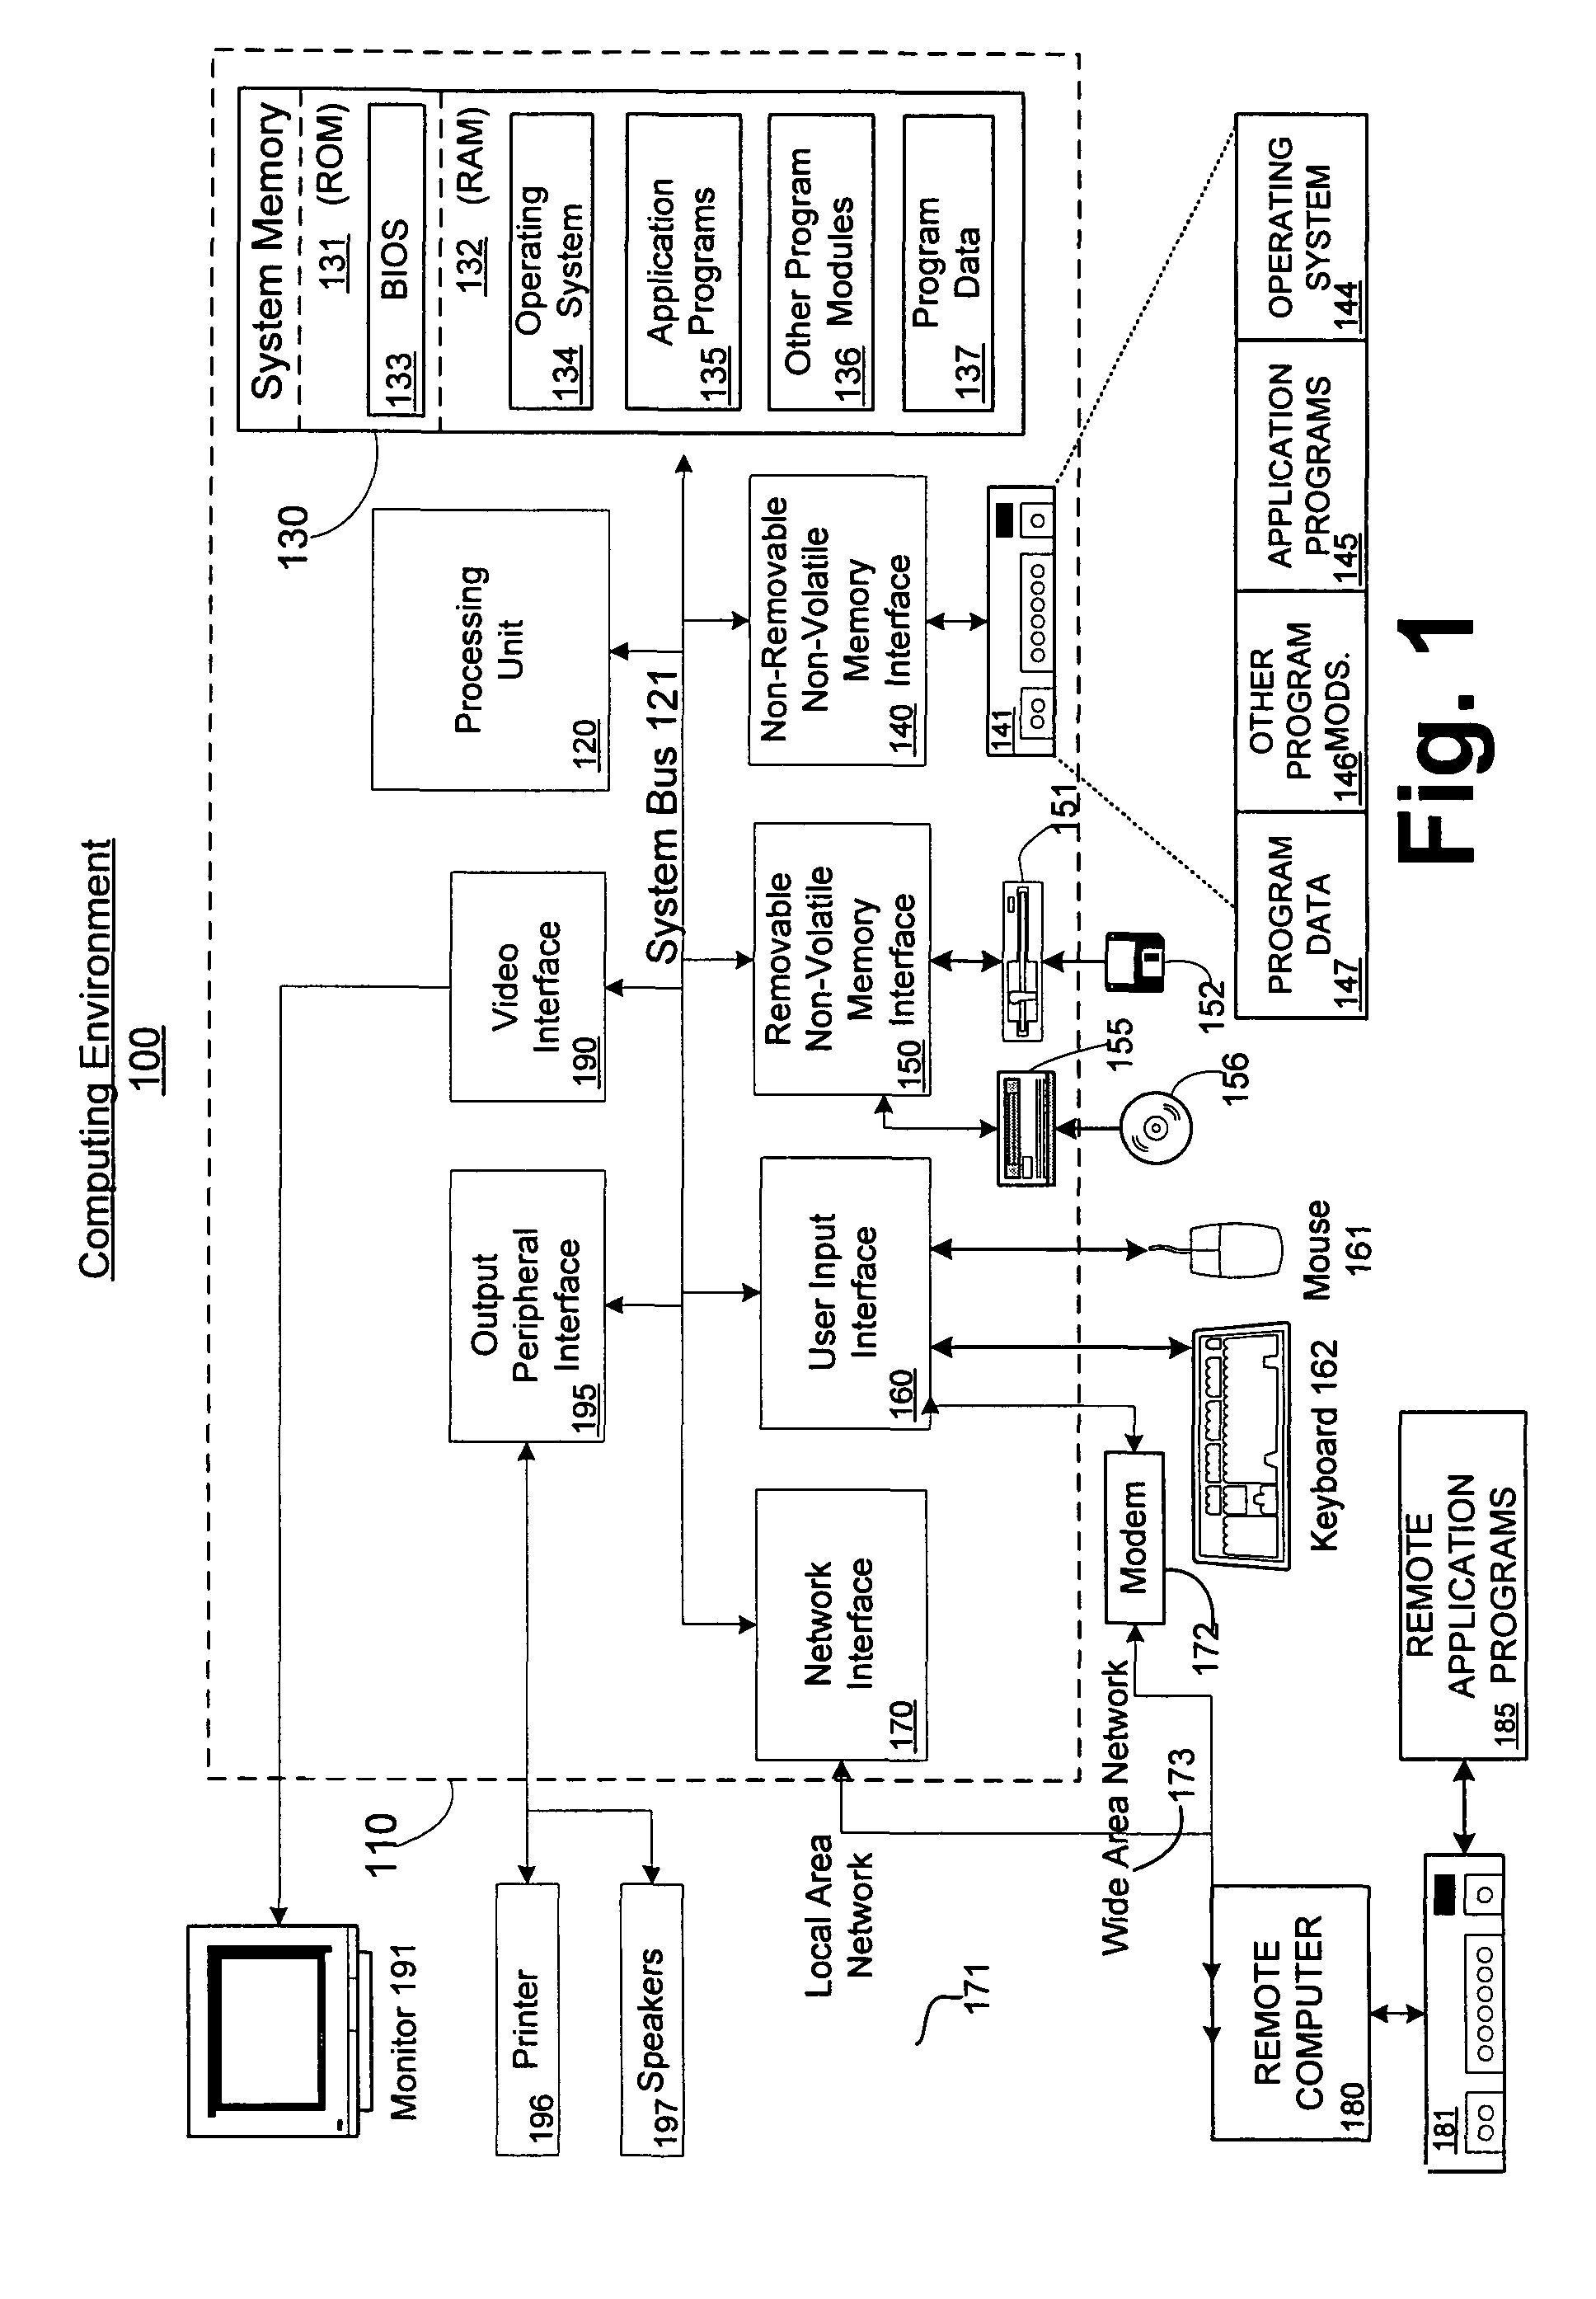 Query intermediate language method and system